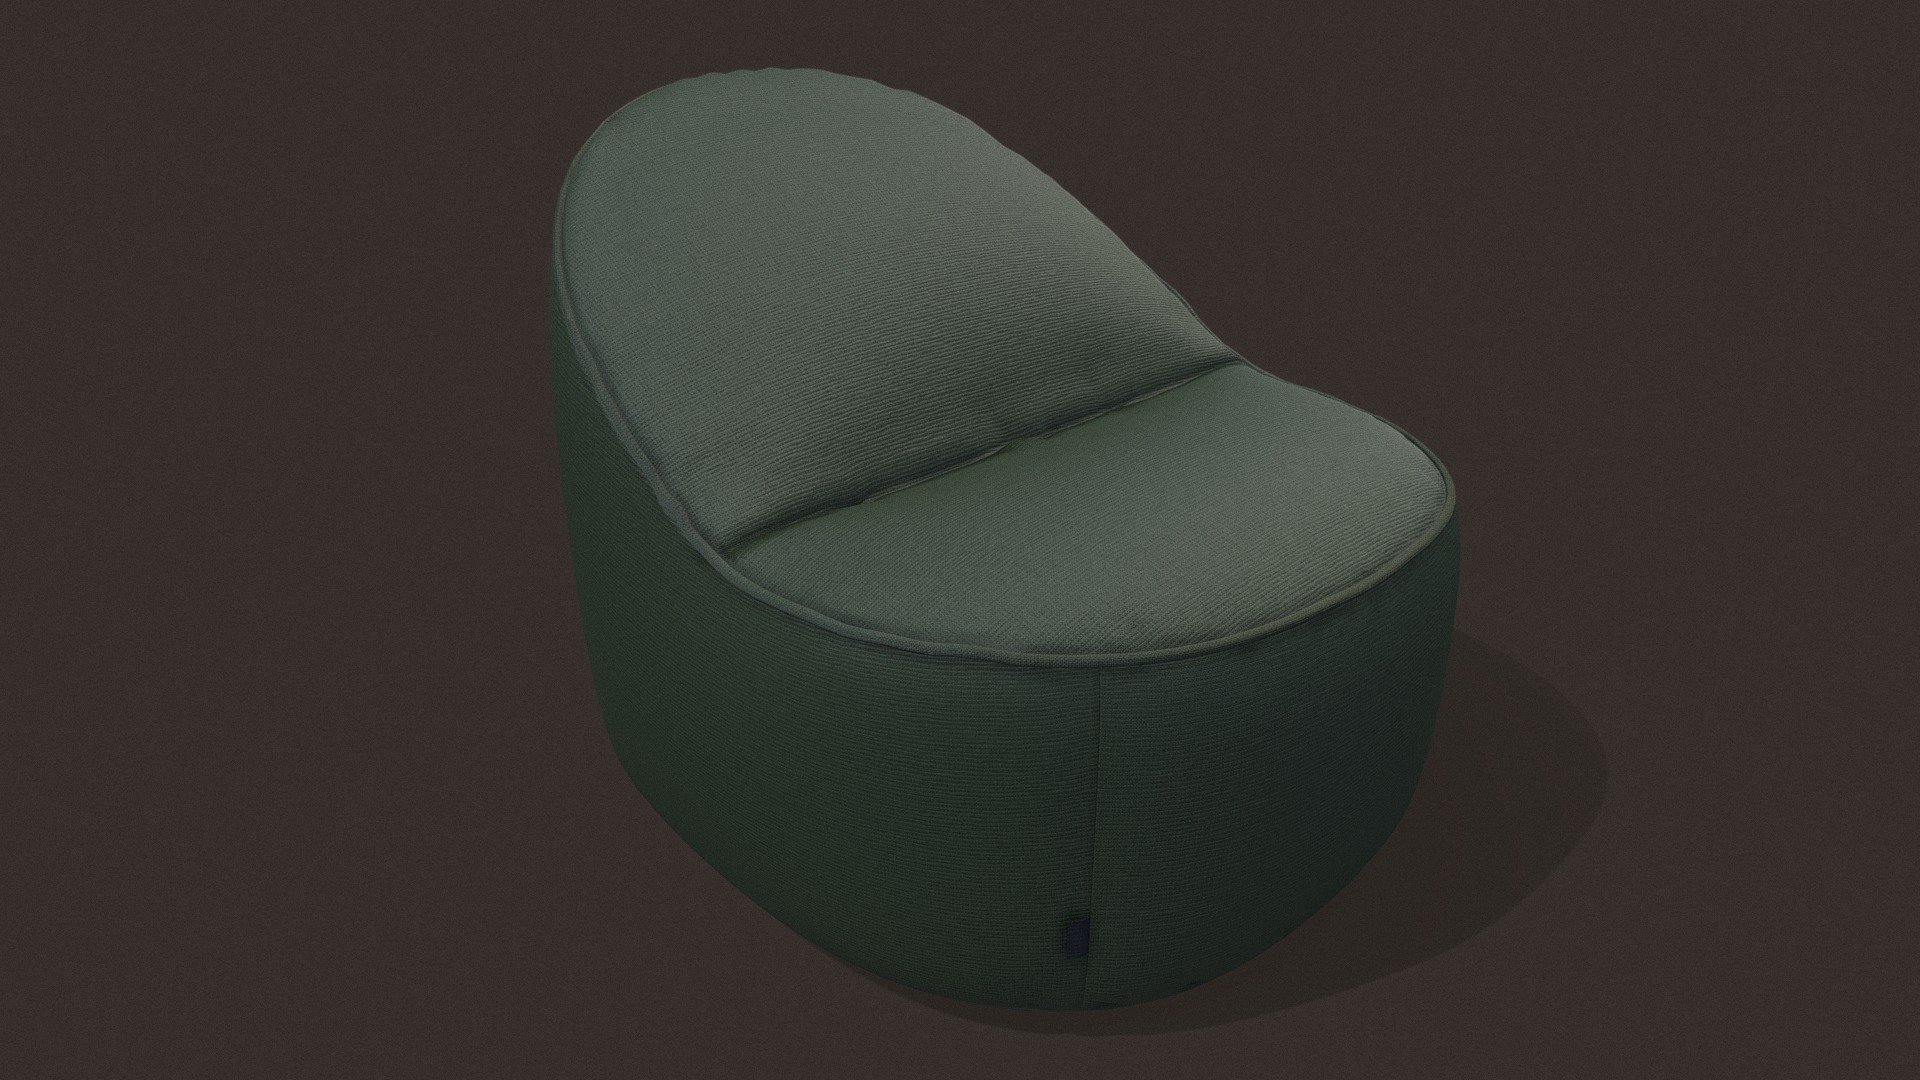 Bean Bag Chair is a model that will enhance detail and realism to any of your rendering projects. The model has a fully textured, detailed design that allows for close-up renders, and was originally modeled in Blender 3.5, Textured in Substance Painter 2023 and rendered with Adobe Stagier Renders have no post-processing.

Features: -High-quality polygonal model, correctly scaled for an accurate representation of the original object. -The model’s resolutions are optimized for polygon efficiency. -The model is fully textured with all materials applied. -All textures and materials are included and mapped in every format. -No cleaning up necessary just drop your models into the scene and start rendering. -No special plugin needed to open scene.

Measurements: Units: M

File Formats: Blender 3.5(Cycles) OBJ FBX

Textures Formats: 4k,. (message me for a custom size ex 1k,2k,8k) If you need a custom label don’t hesitate to contact me through support 3d model